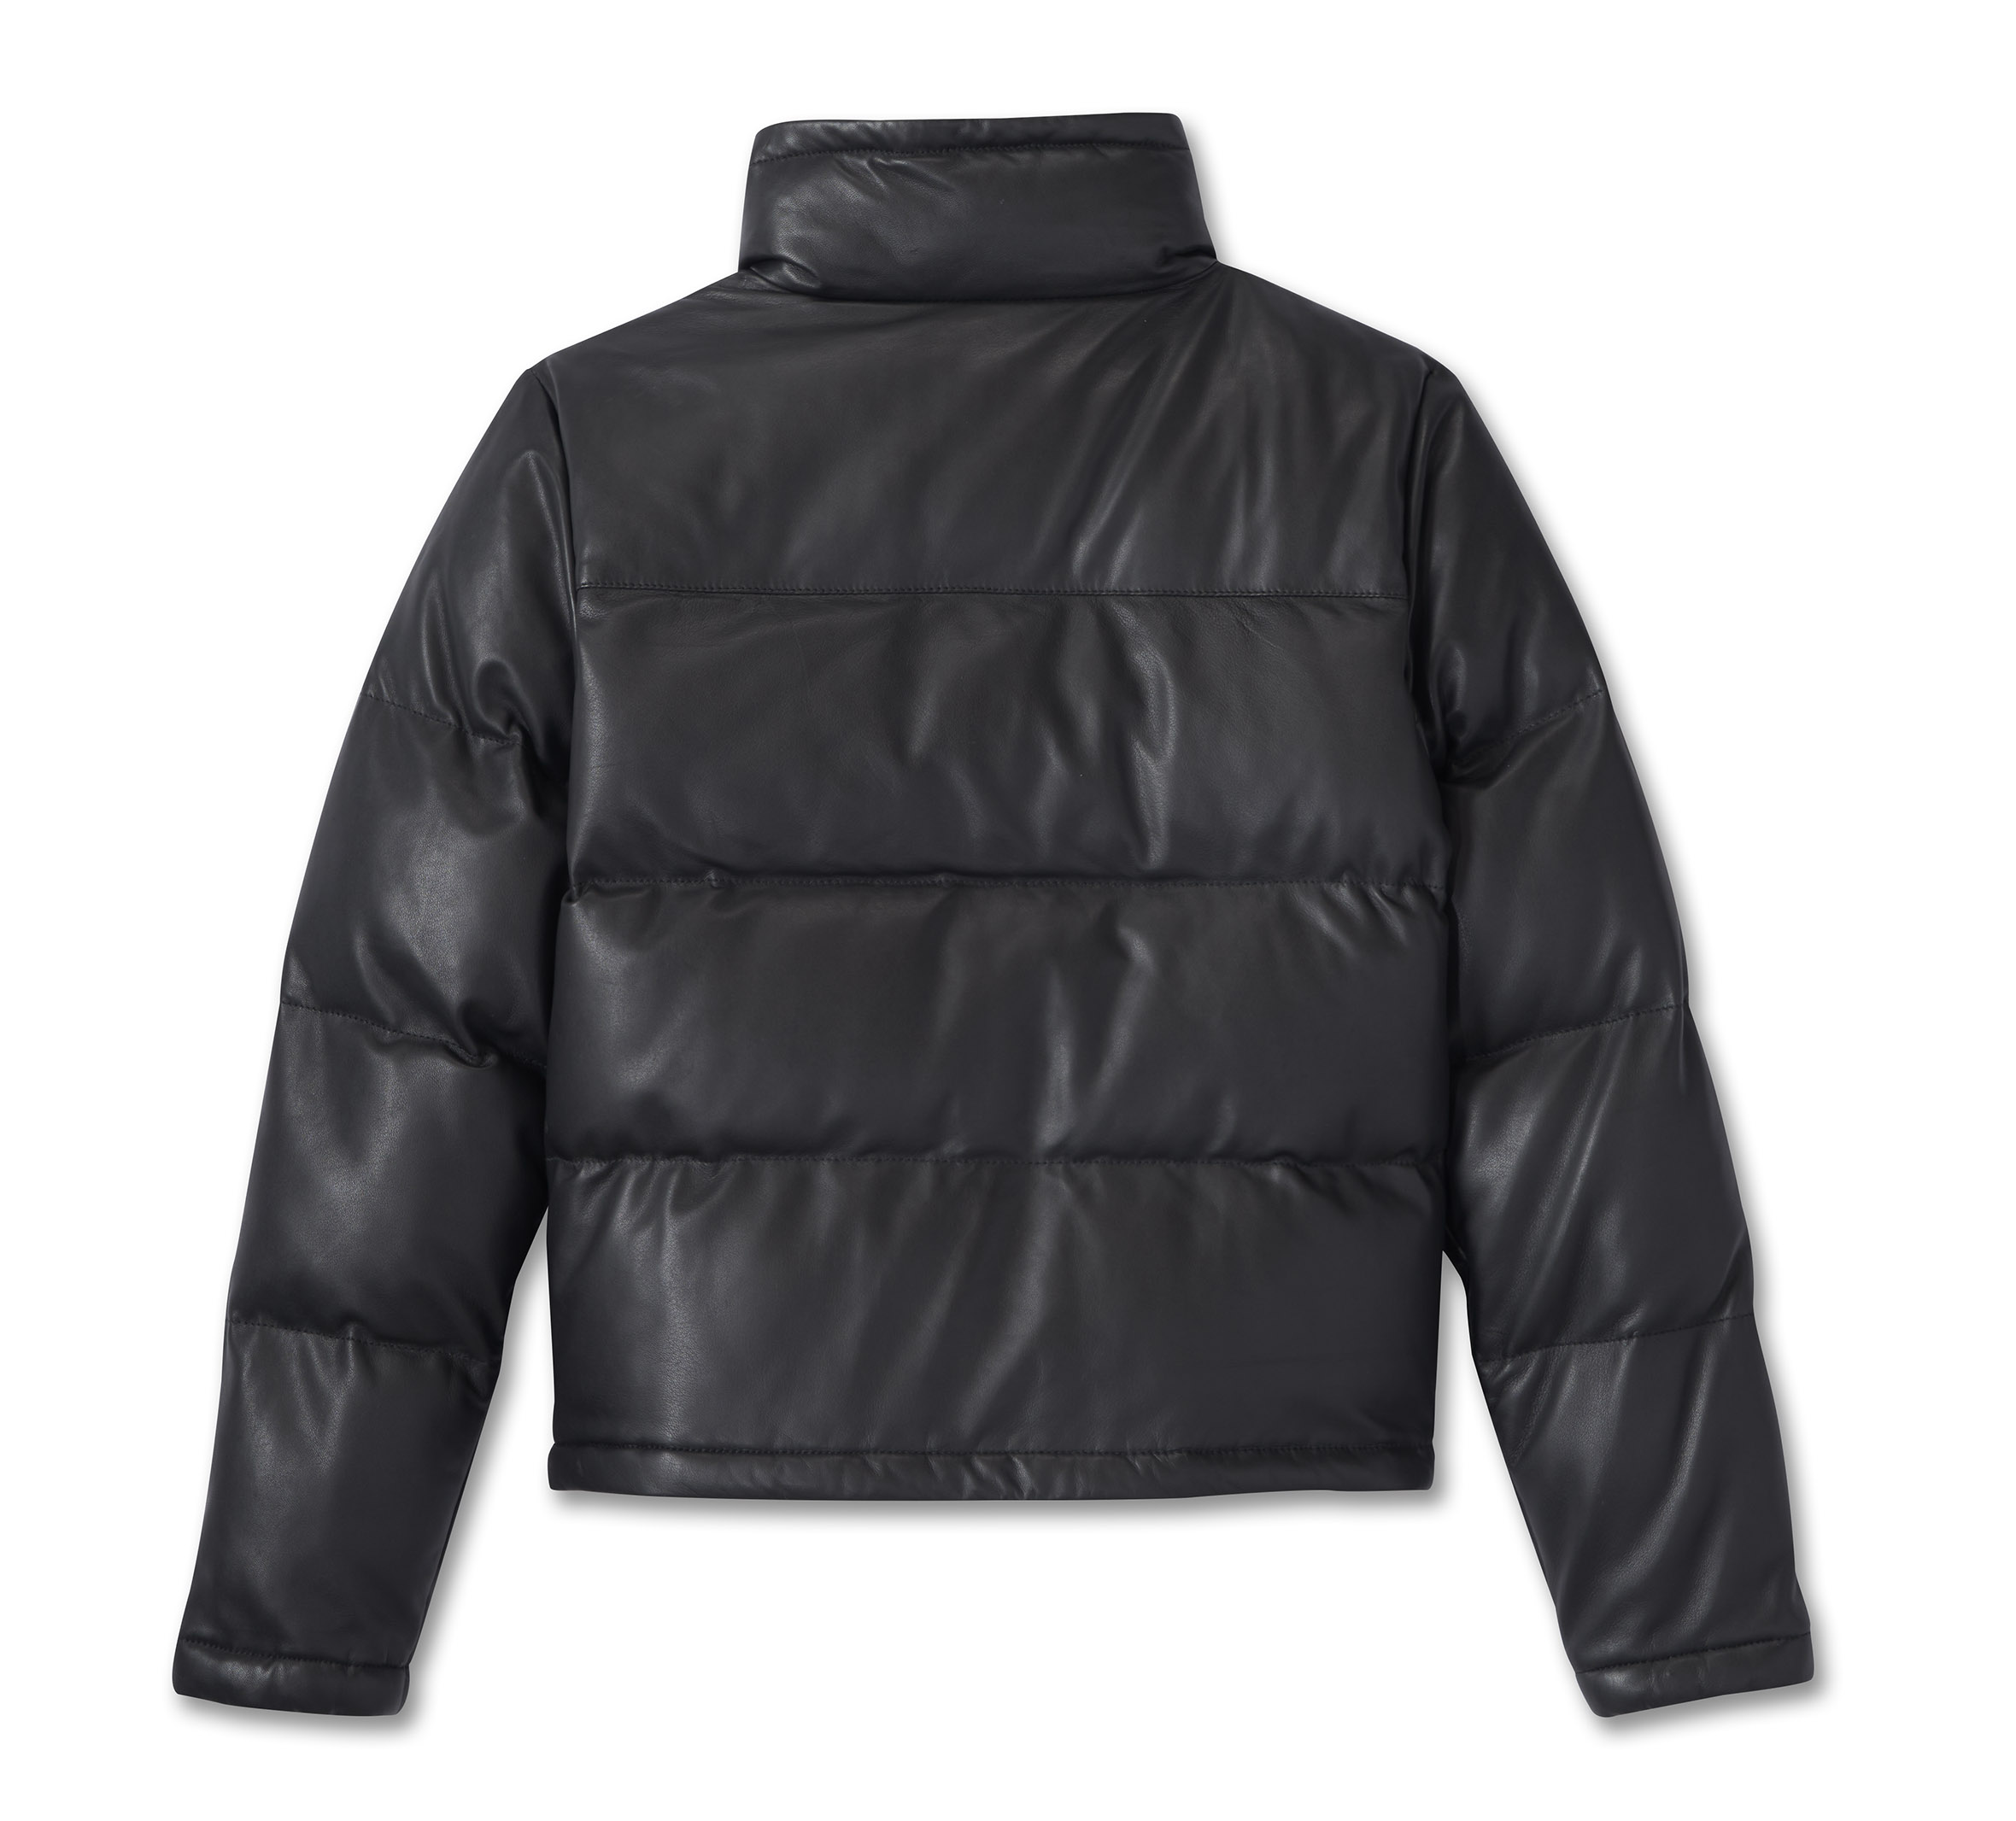 Women's Blacked Out Leather Puffer Jacket | Harley-Davidson USA